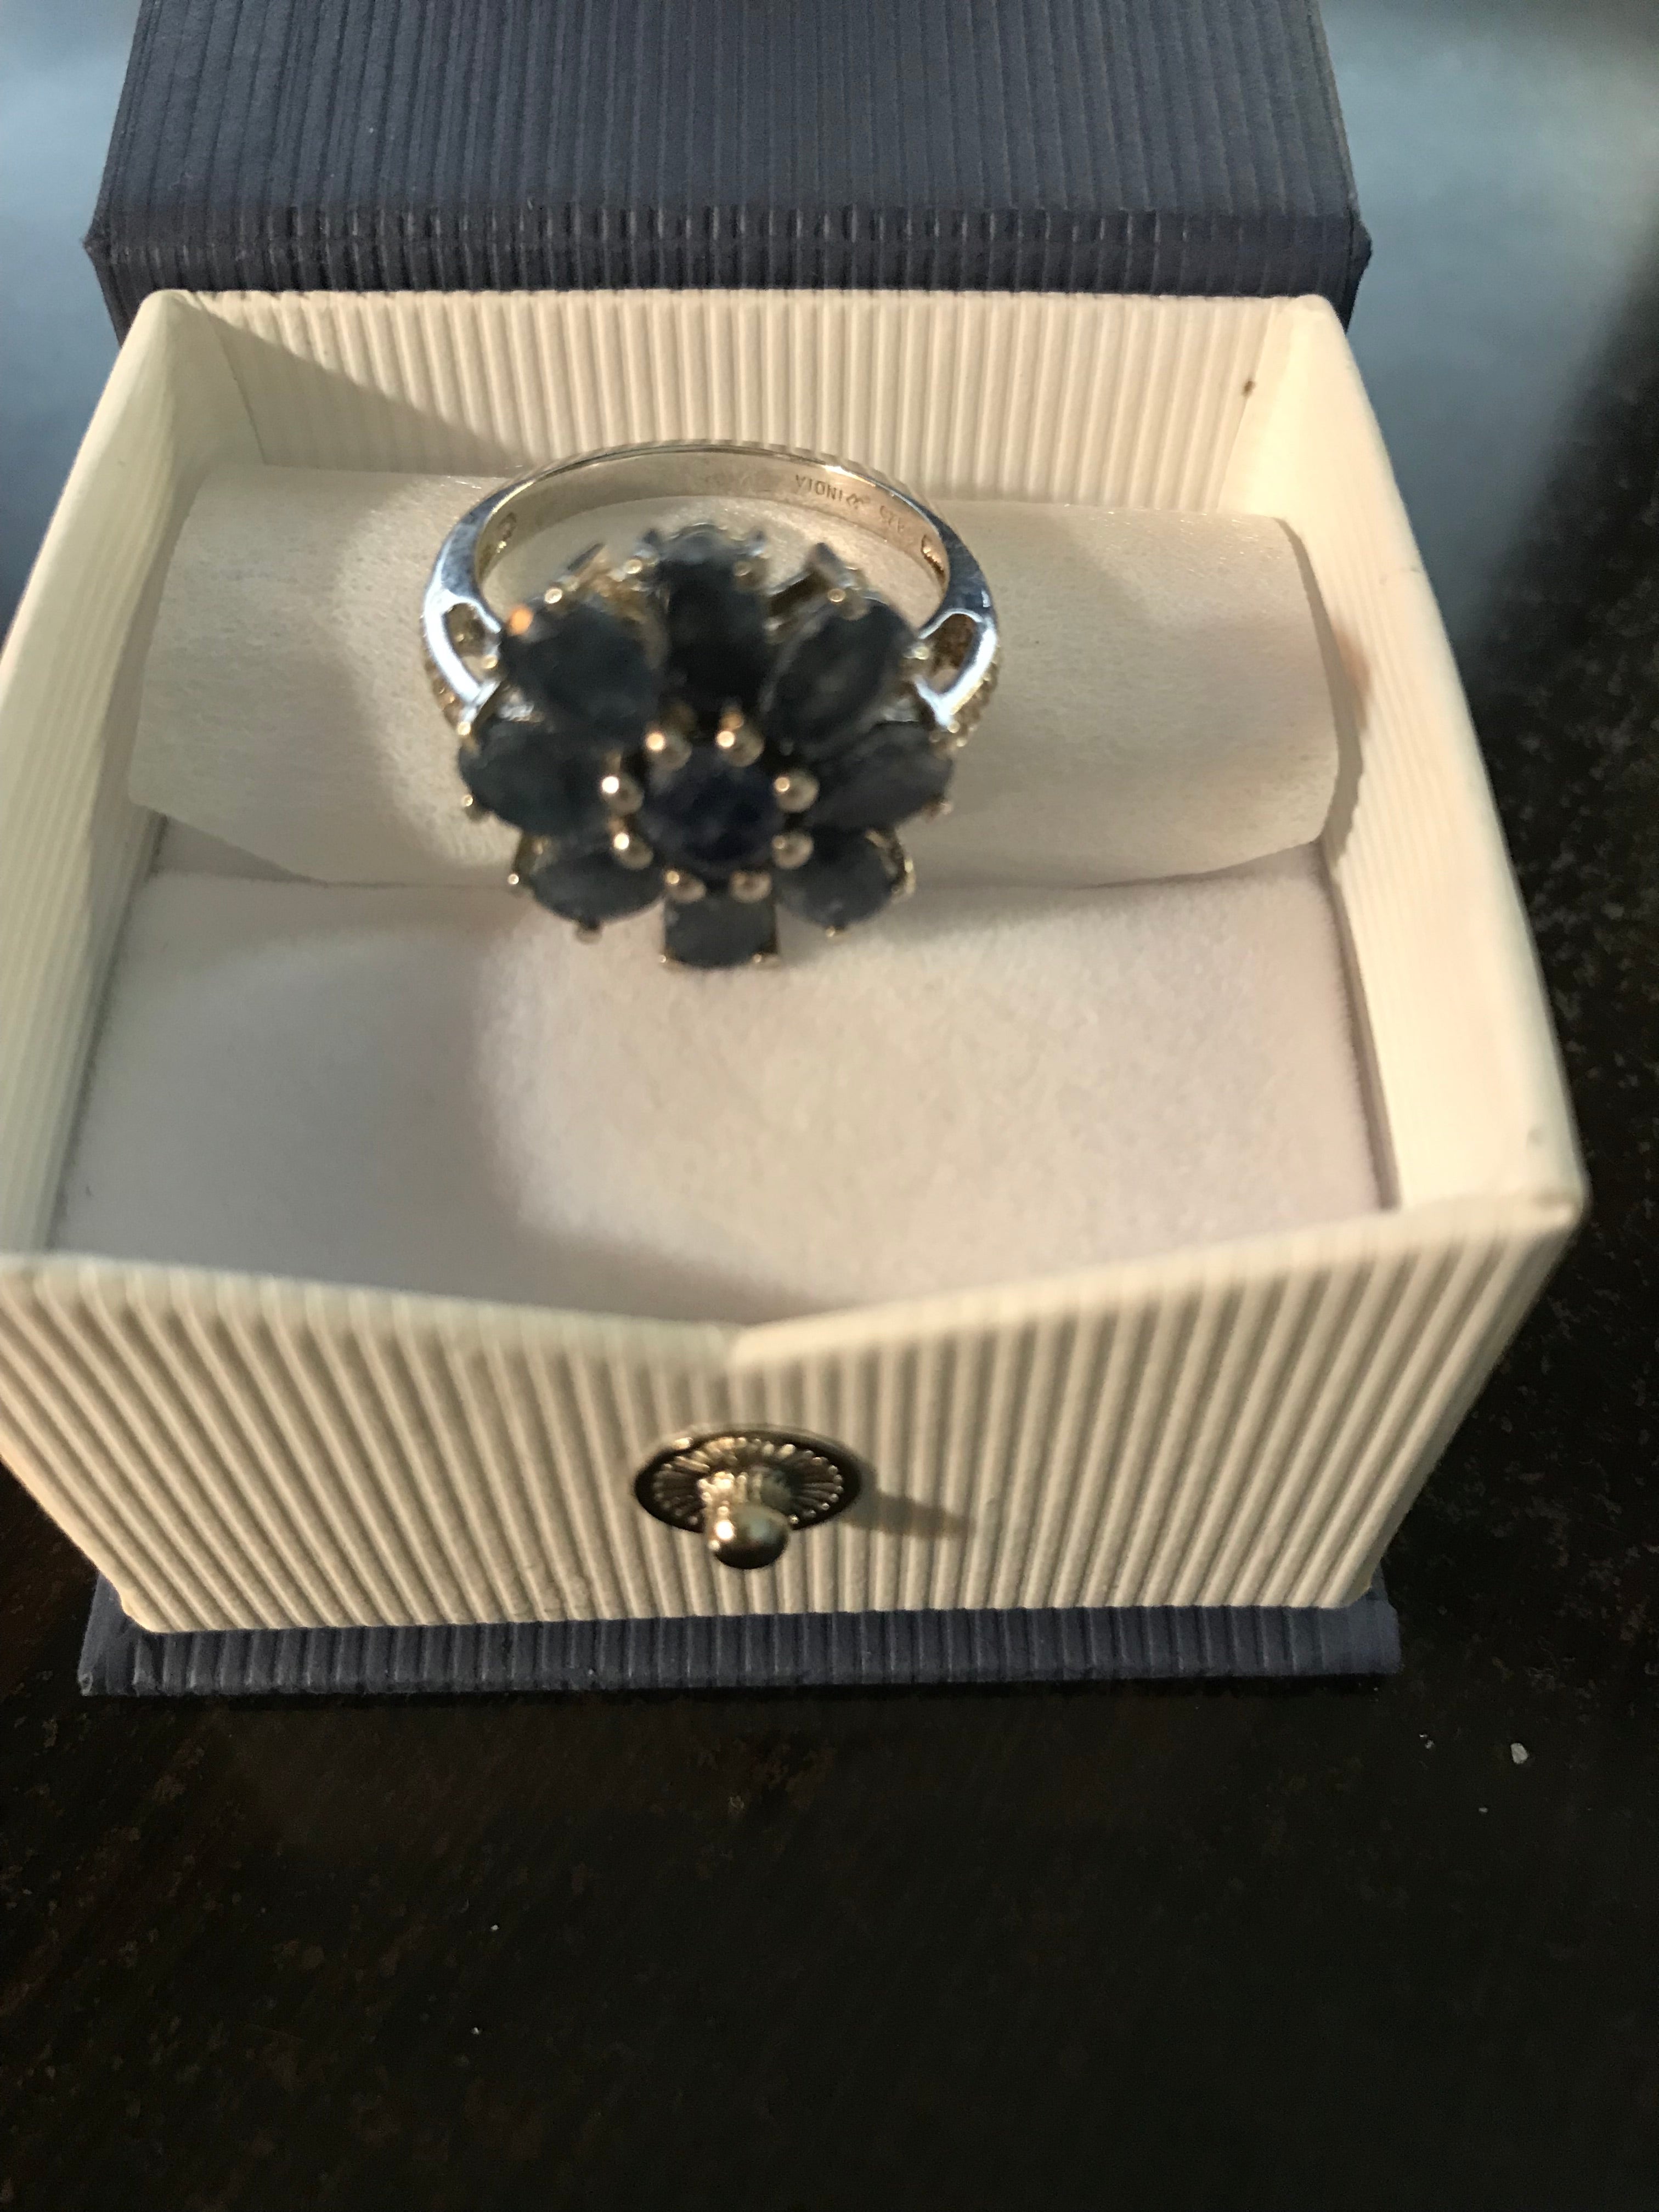 Natural 5.11 ct Sapphire Floral Sterling Ring